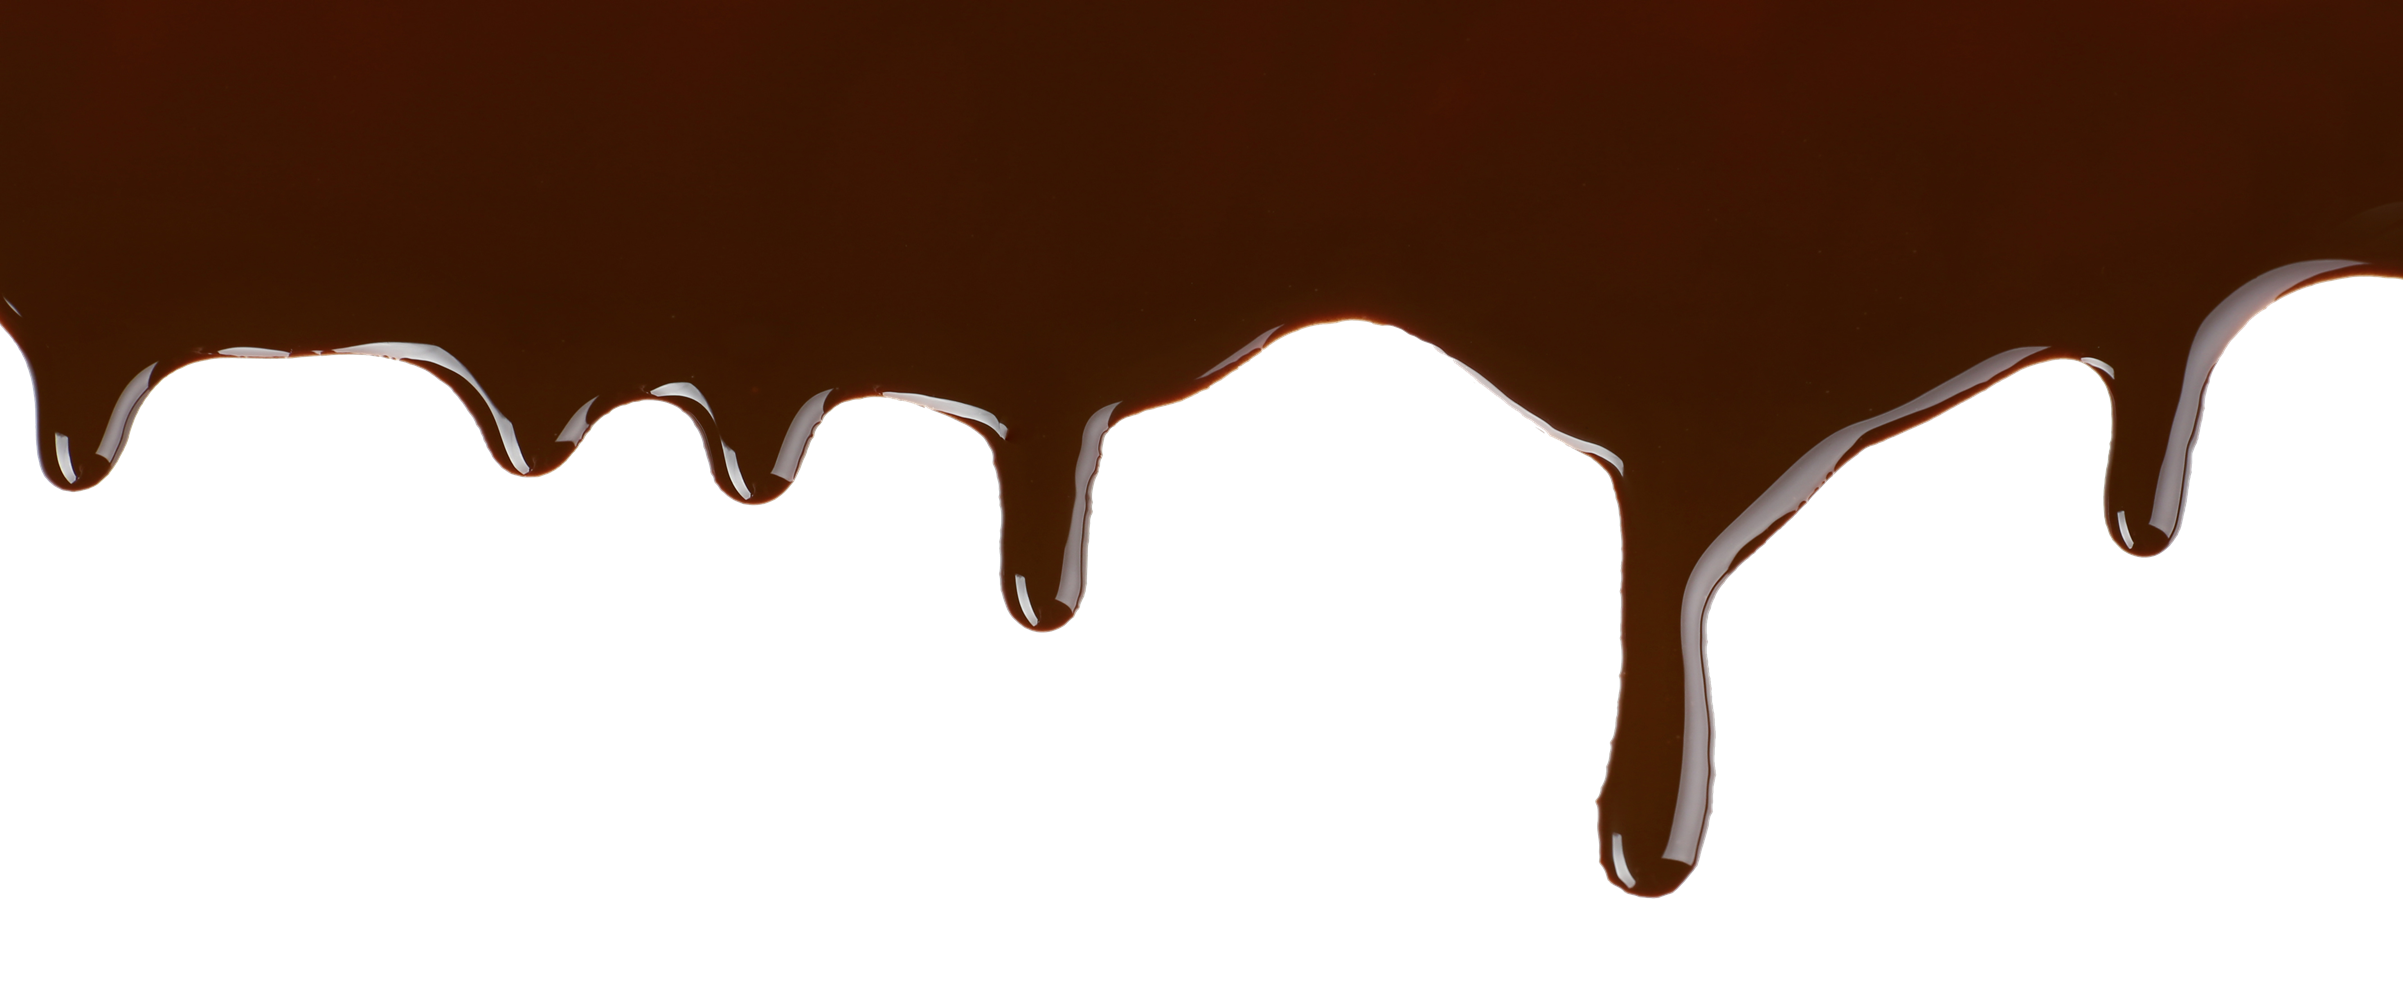 Melted Chocolate Image PNG Image